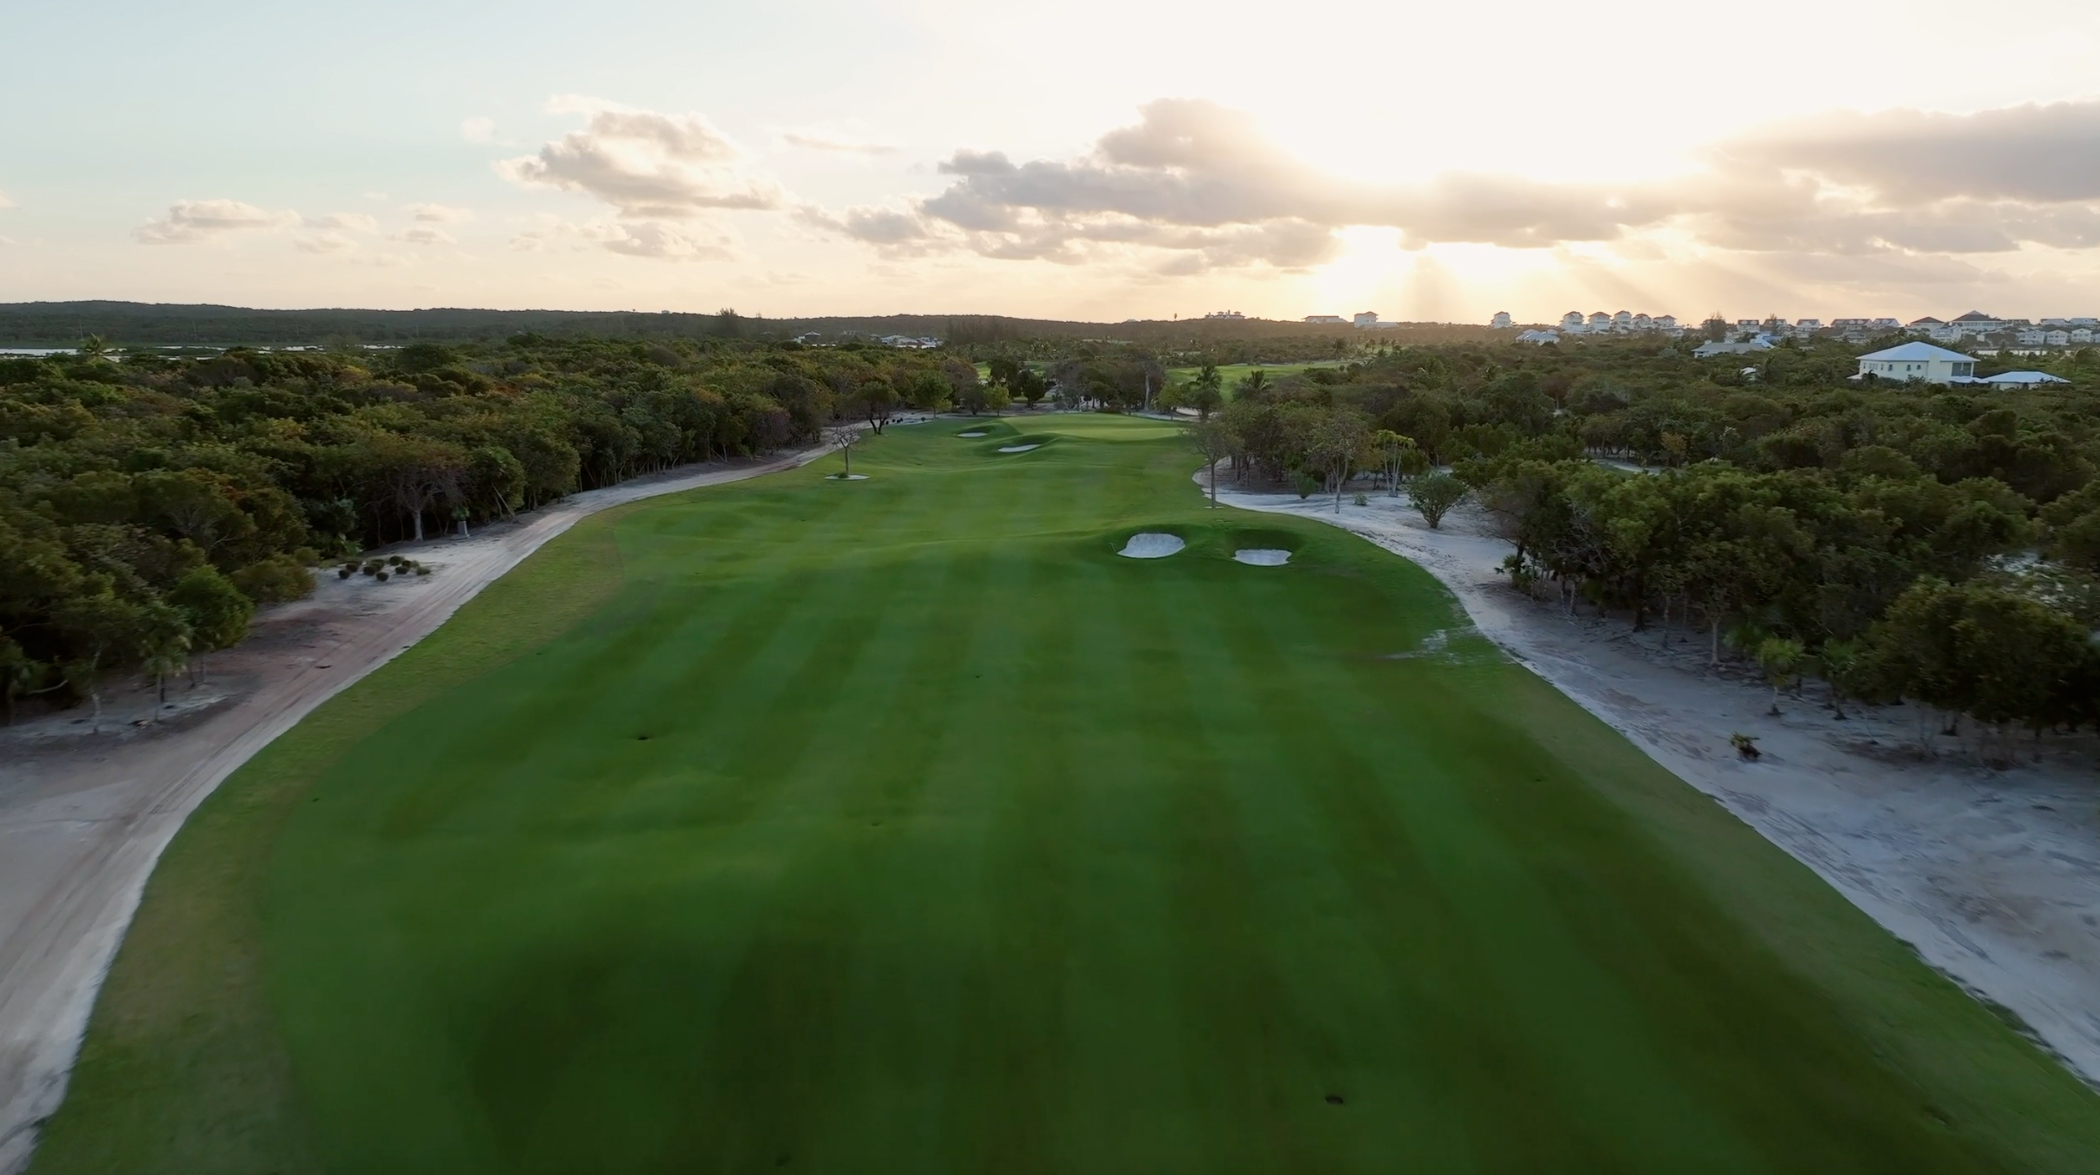 Aerial shot of Hole 12 from The Abaco Club golf course